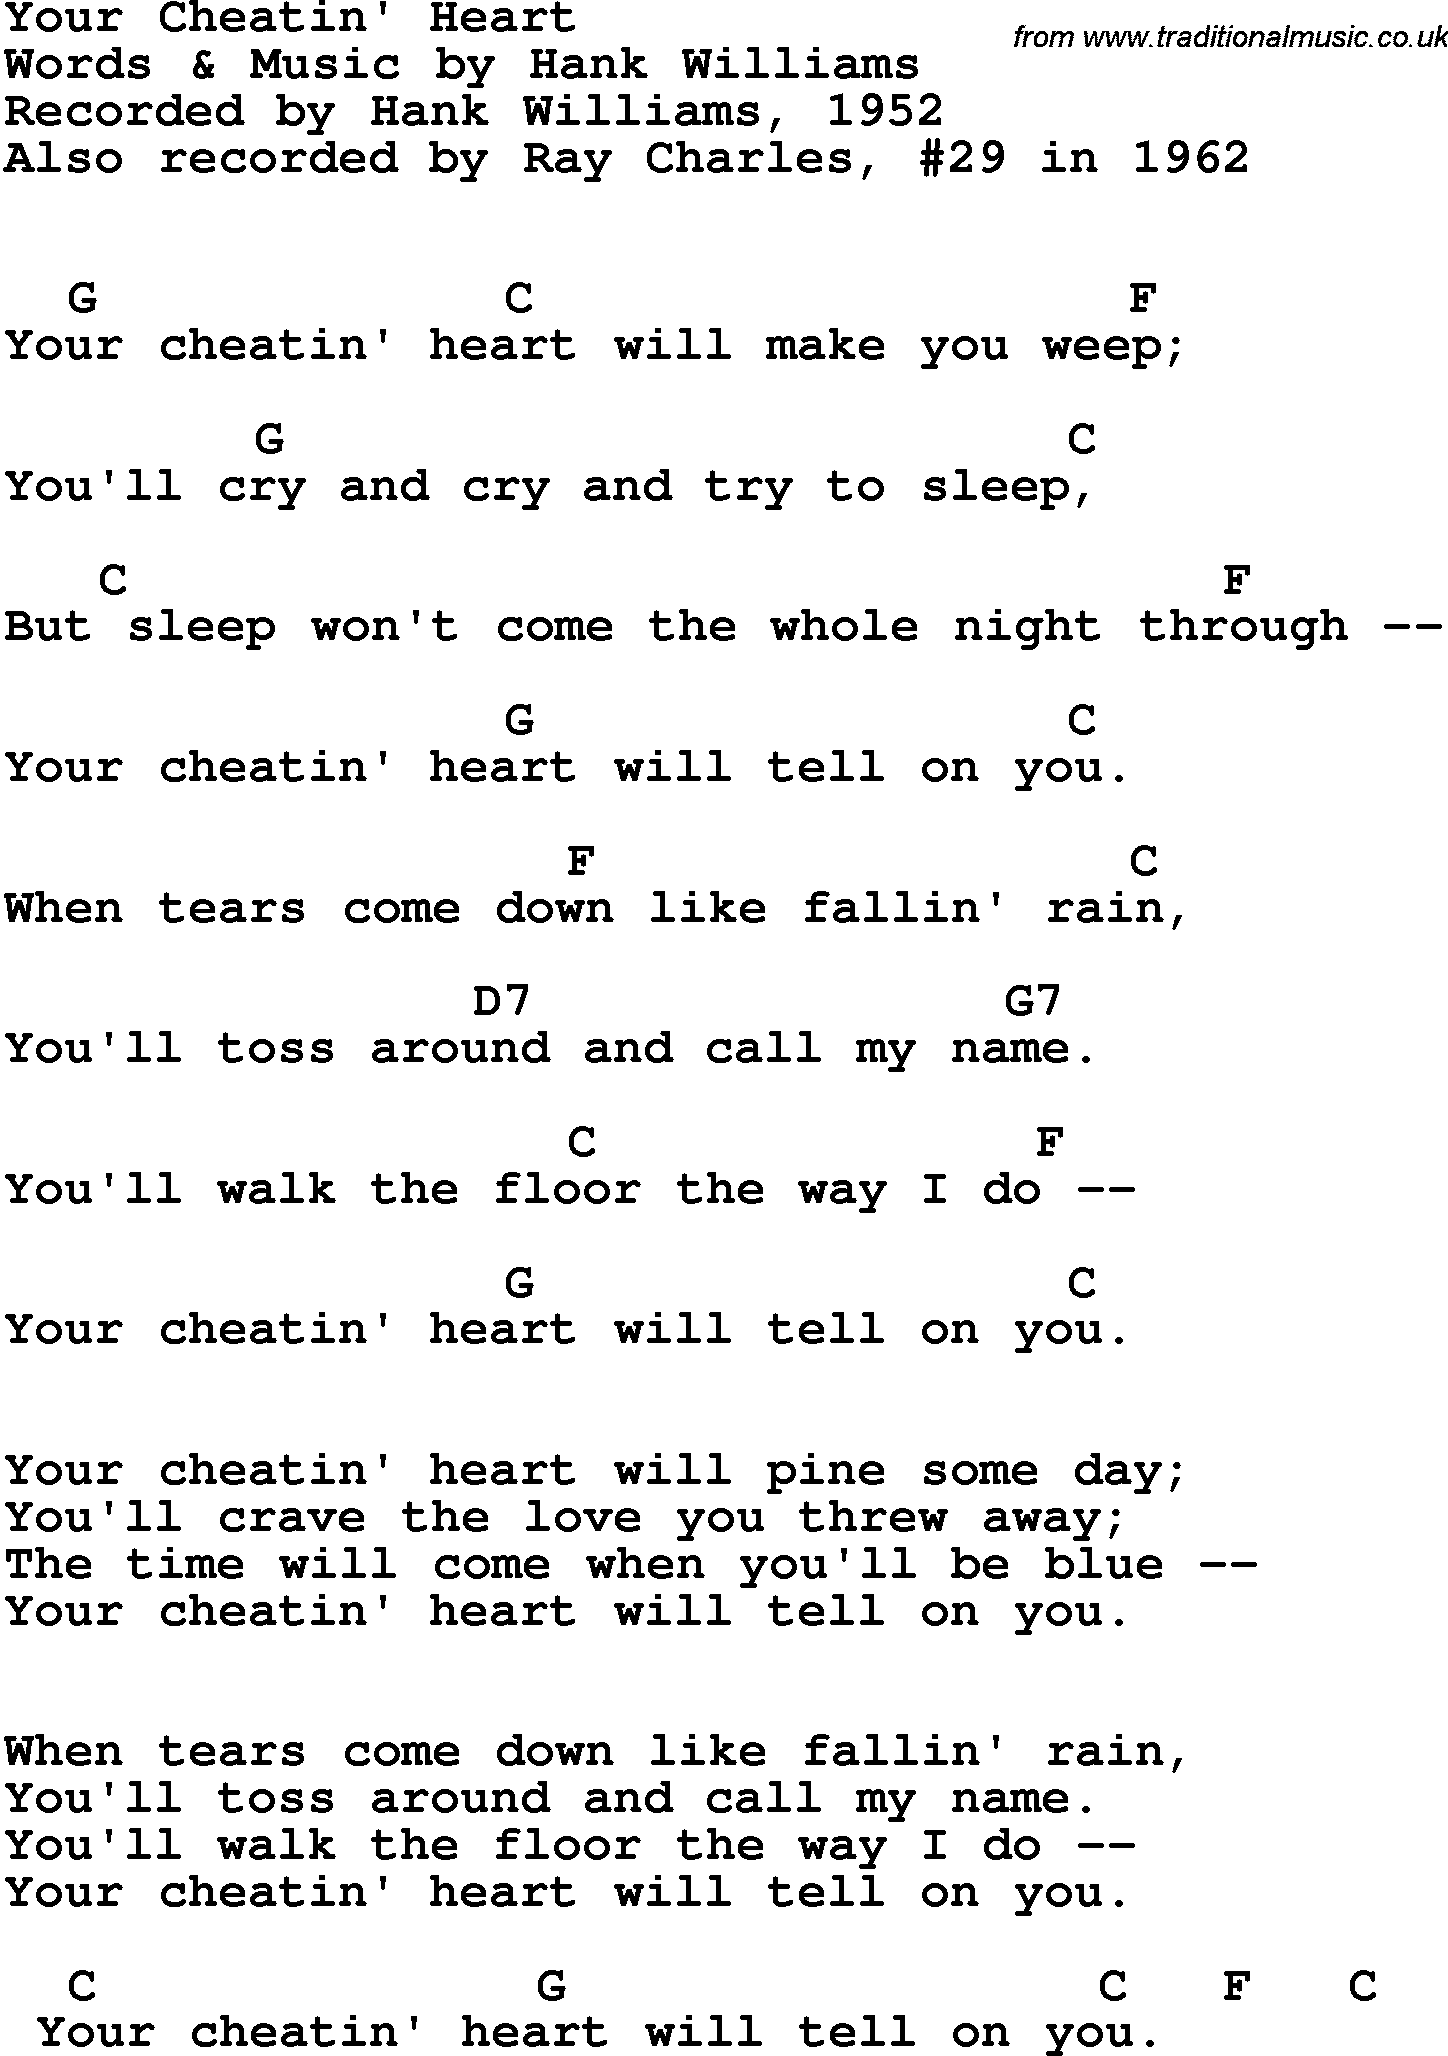 Song Lyrics with guitar chords for Your Cheatin' Heart - Ray Charles, 1962